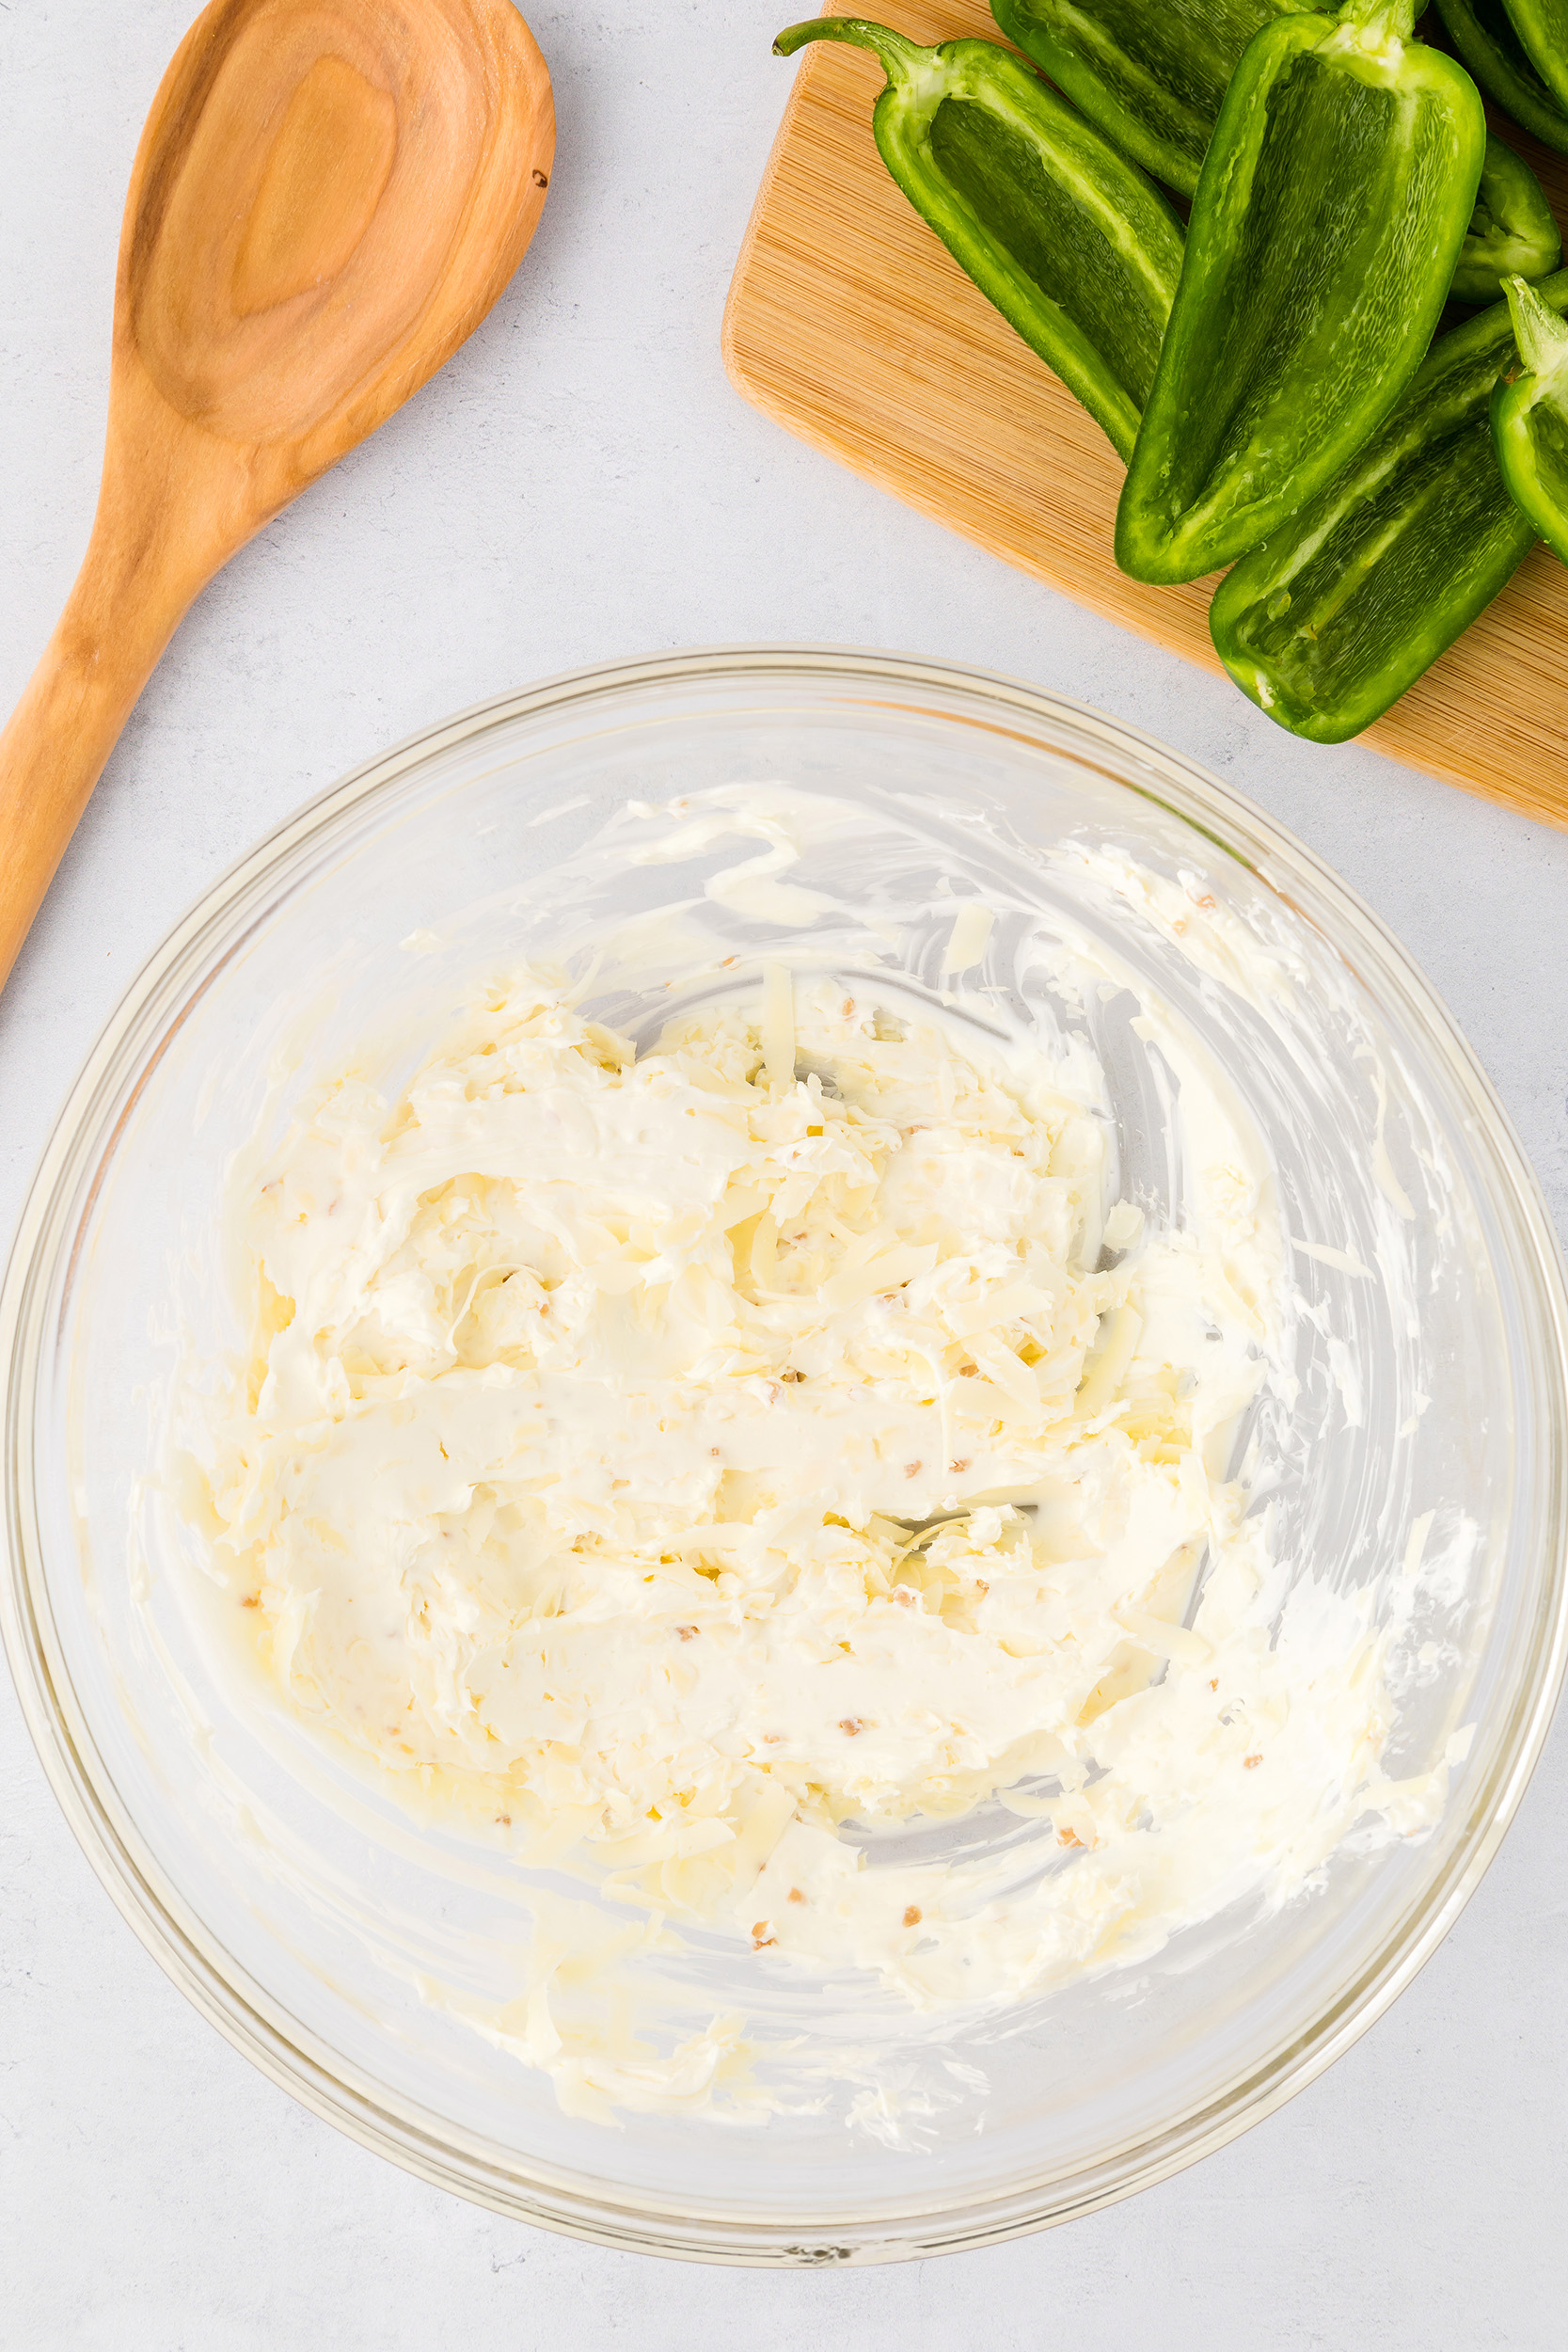 cream cheese and shredded cheese combined in a glass bowl